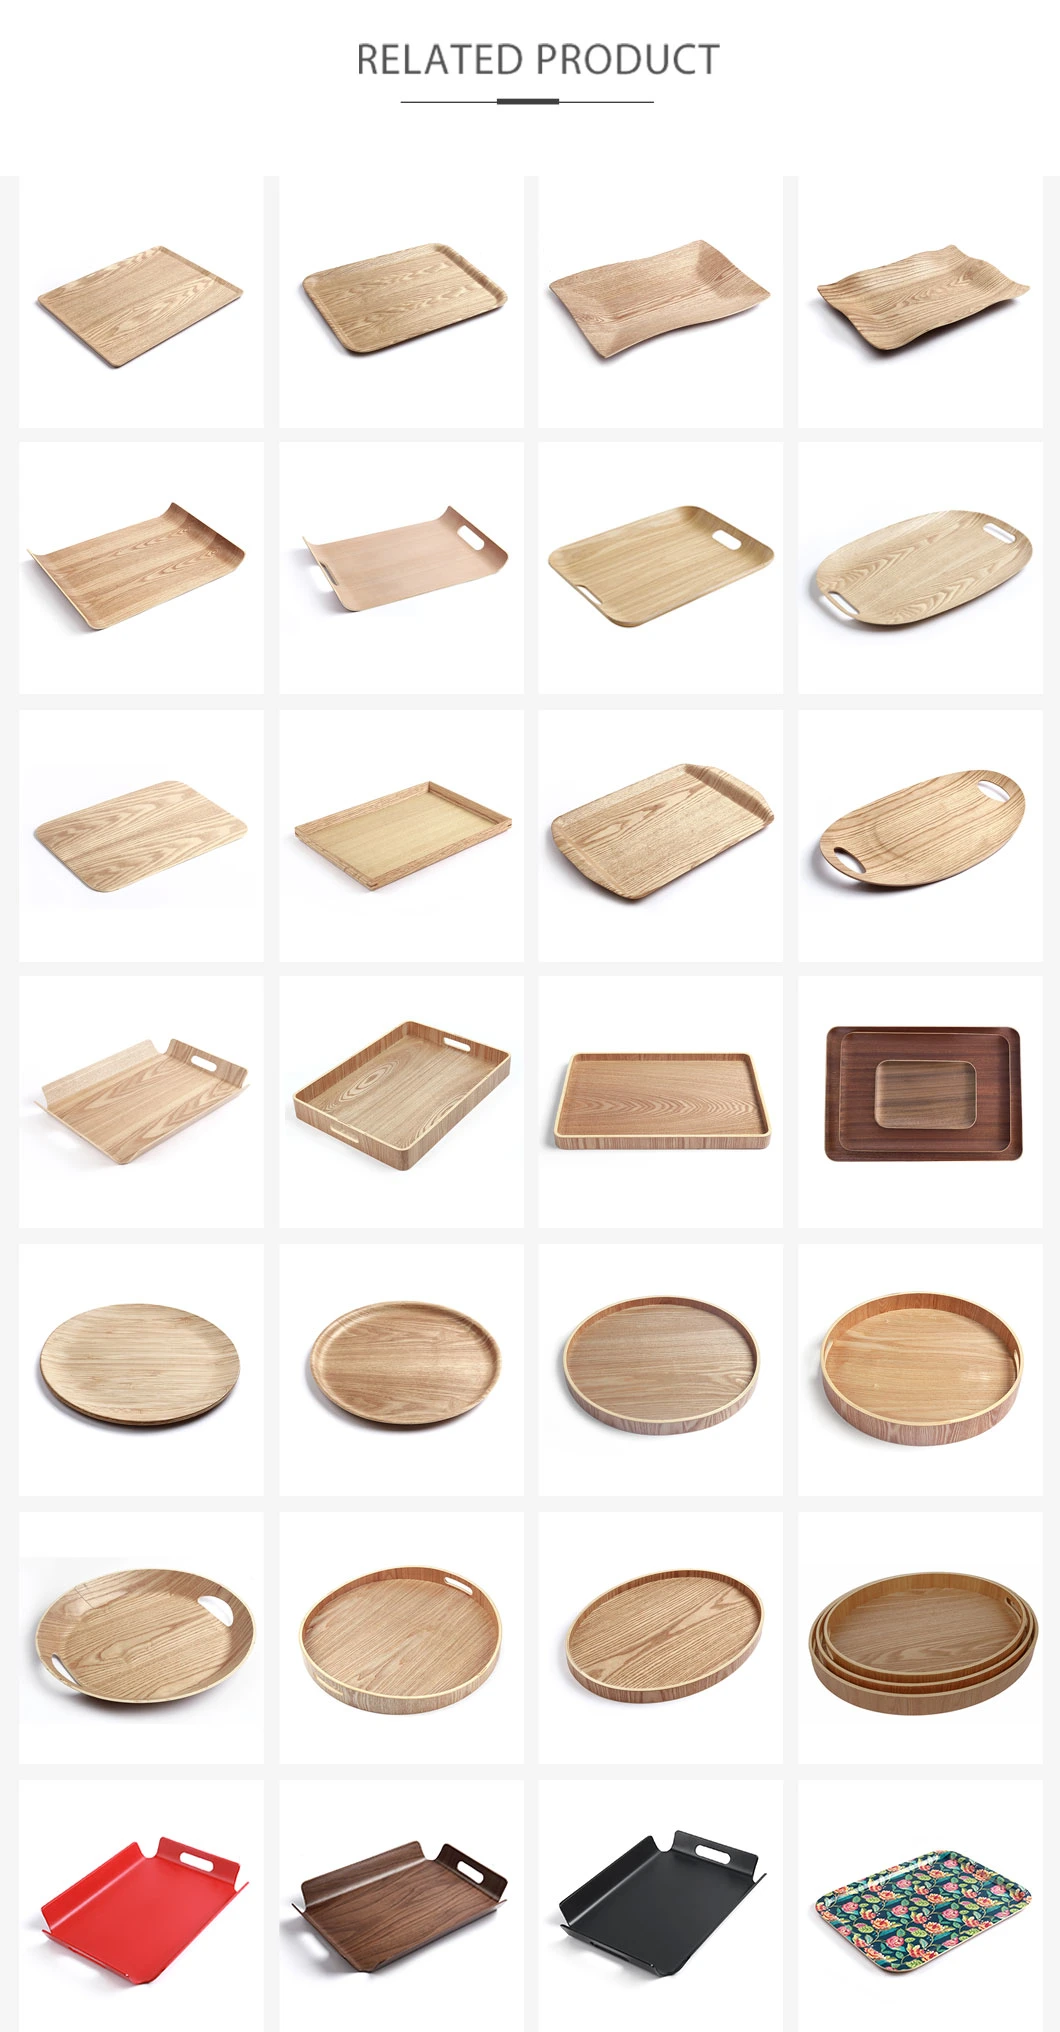 Oval Wooden Dinnerware Tabletop Cup Non-Disposable Hotel Set Gift Holder Serving Tray of 3PCS